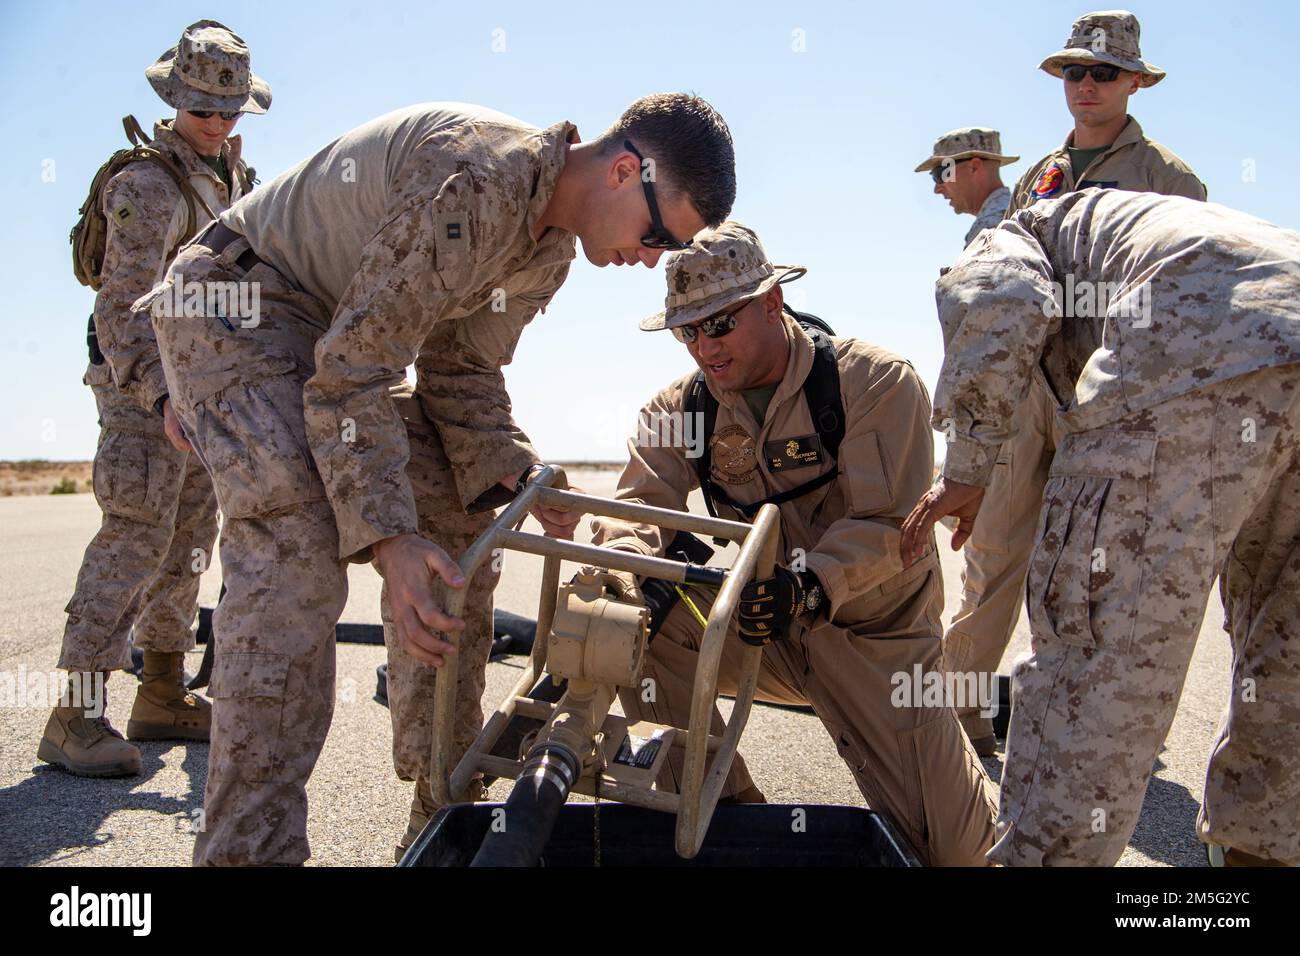 U.S. Marine Corps Capt. Jacob Schiltz, a logistics officer, left, and Warrant Officer Manuel Guerrero, an expeditionary airfield and emergency services officer, assigned to Aviation Ground Support, Marine Aviation Weapons and Tactics Squadron One (MAWTS-1) connect fuel hoses to a fuel meter during a forward arming and refueling point (FARP) practical application, while participating in the Weapons and Tactics Instructor (WTI) course 2-22, at Auxiliary Airfield II, near Yuma, Arizona, March 16, 2022. WTI is a seven-week training event hosted by MAWTS-1, providing standardization advanced tactic Stock Photo